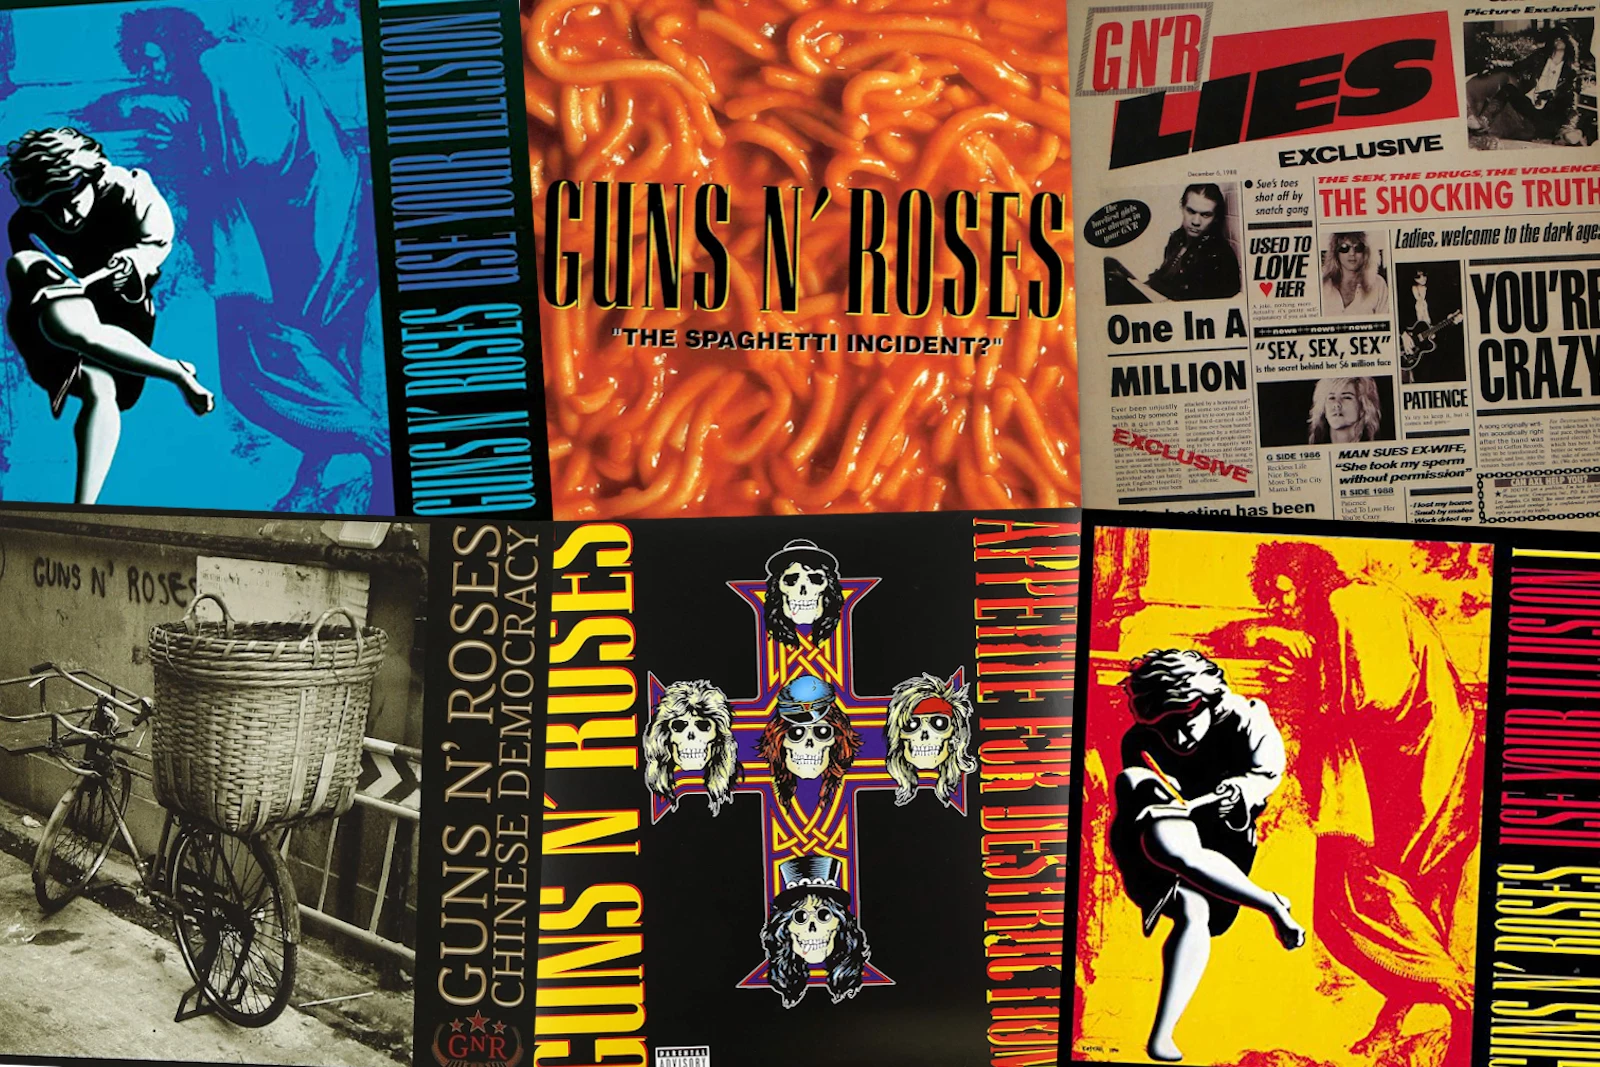 The 50 greatest Guns N' Roses songs ever, and the stories behind them